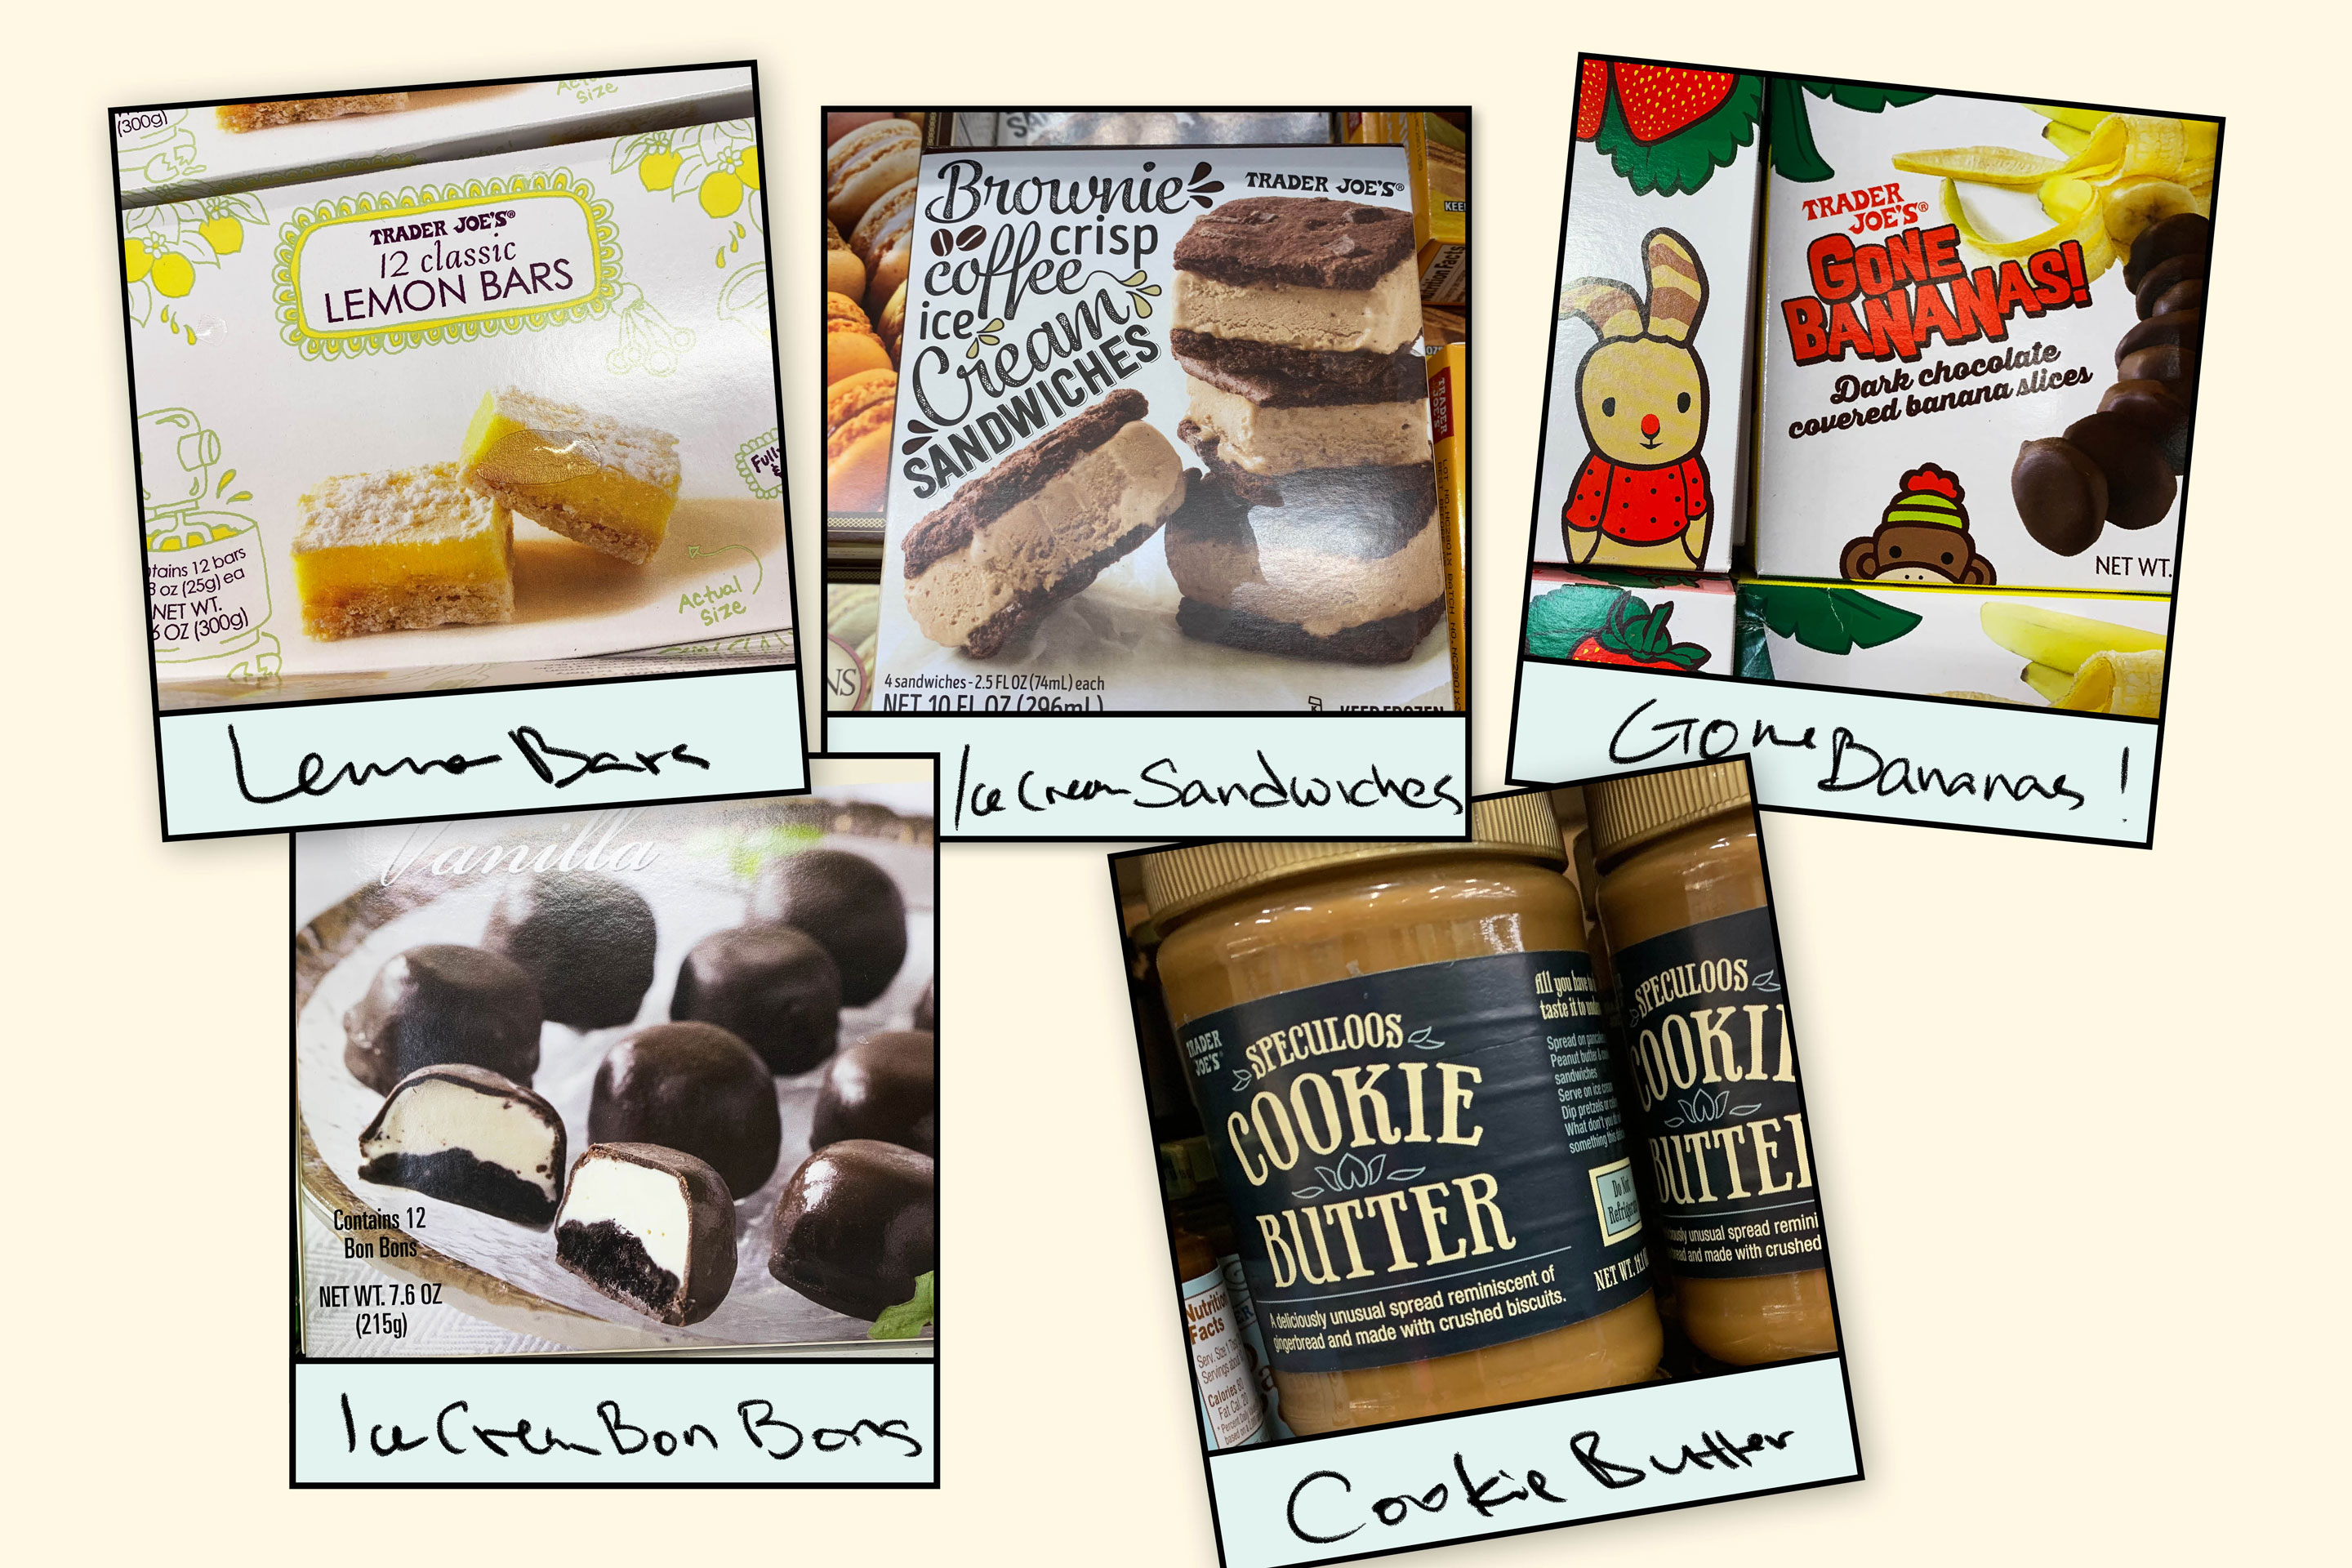 9 Decadent Trader Joe S Desserts I Can Never Resist And They Re All Under 6 Money